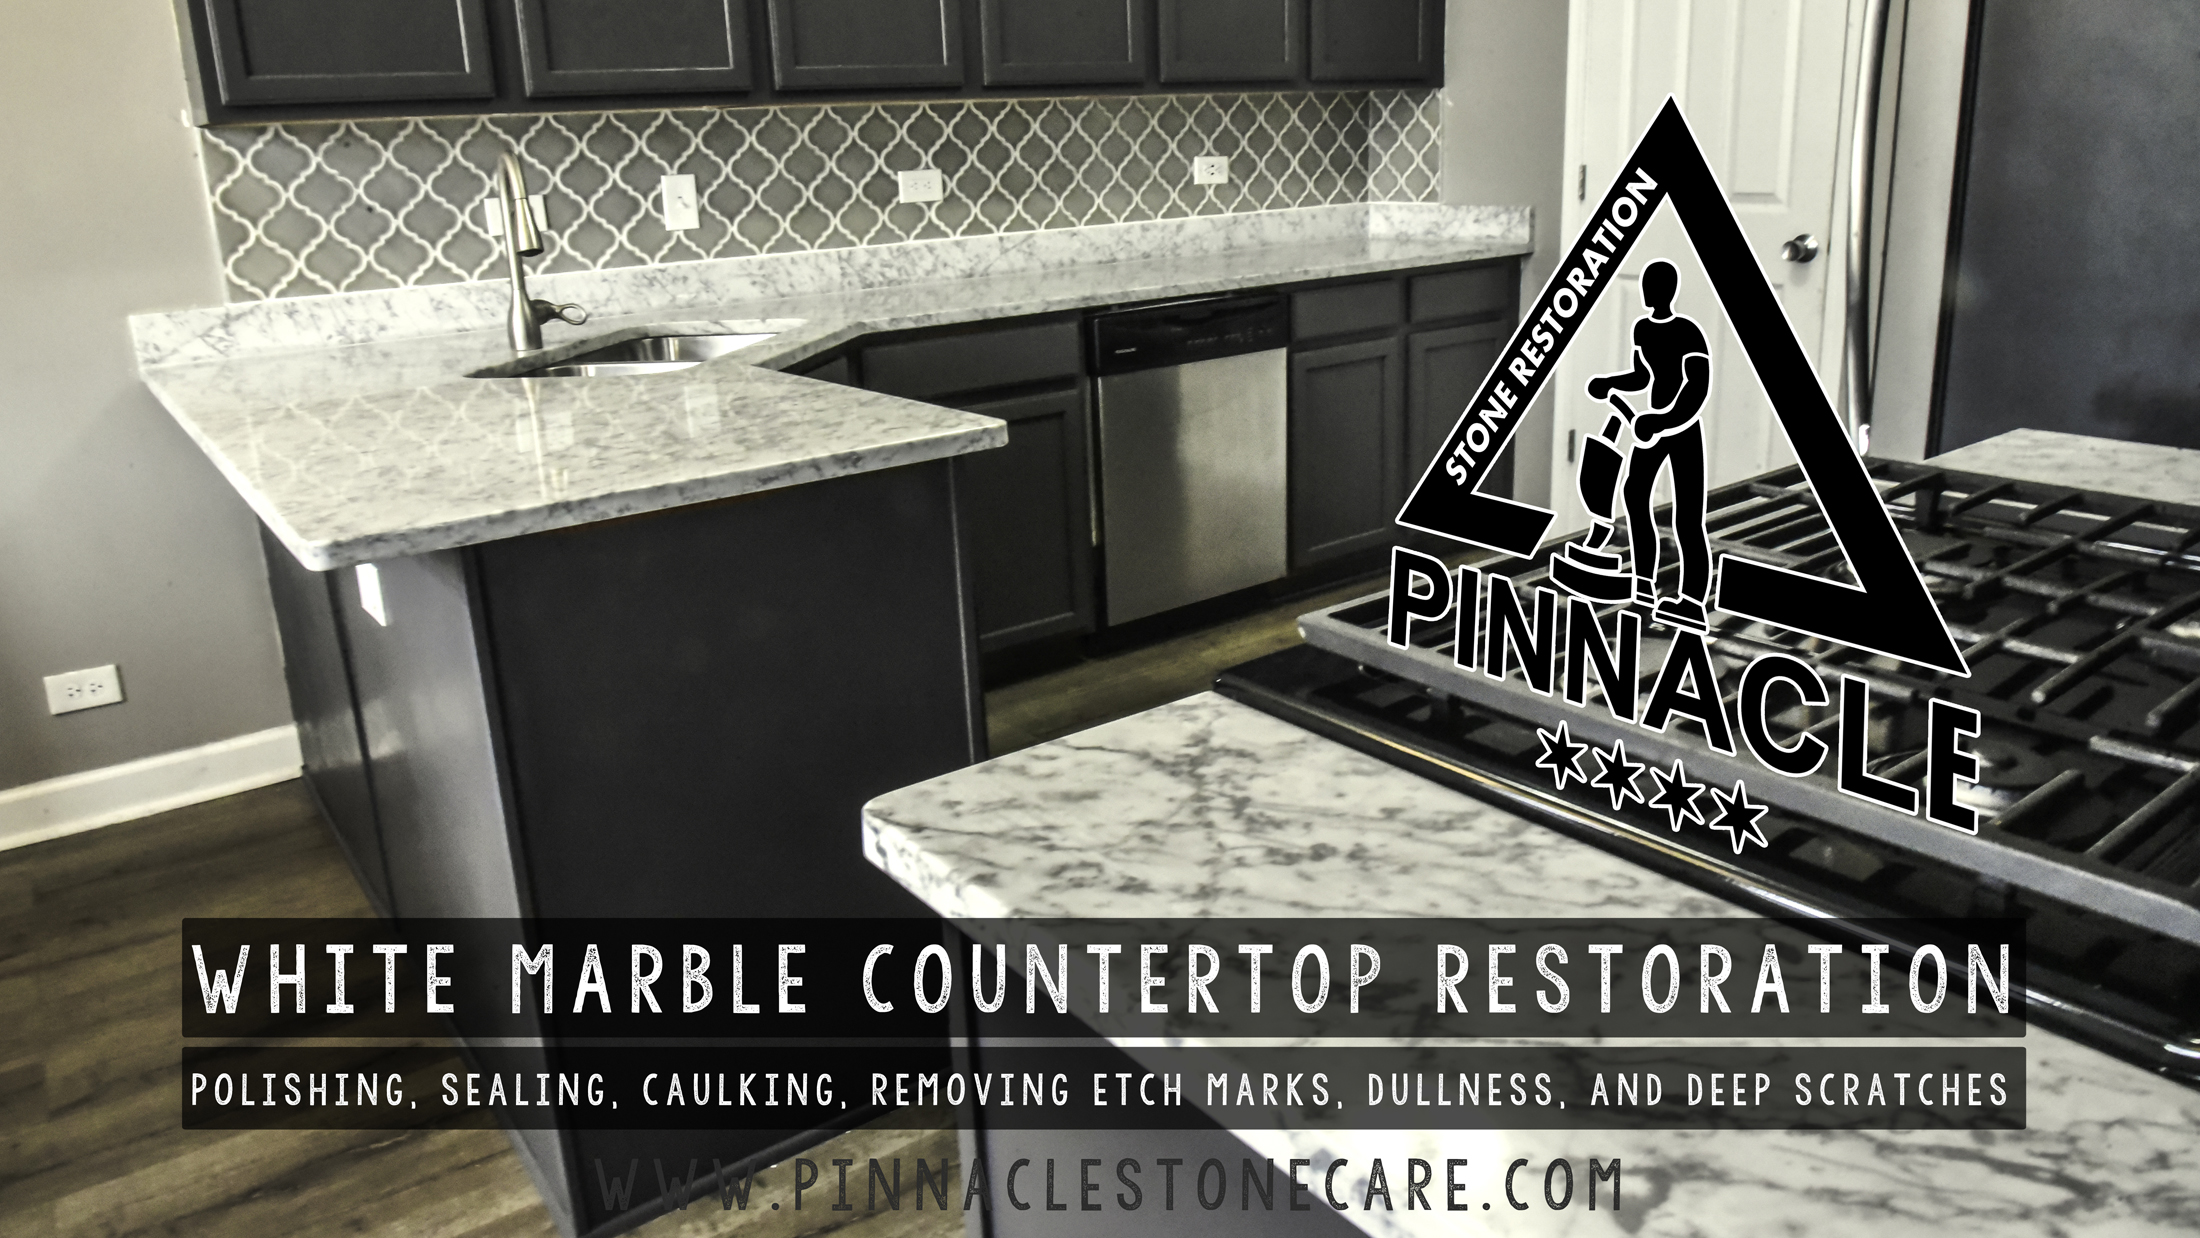 WHITE MARBLE COUNTERTOP RESTORATION – removing etch marks, dullness, scratches, polishing, sealing